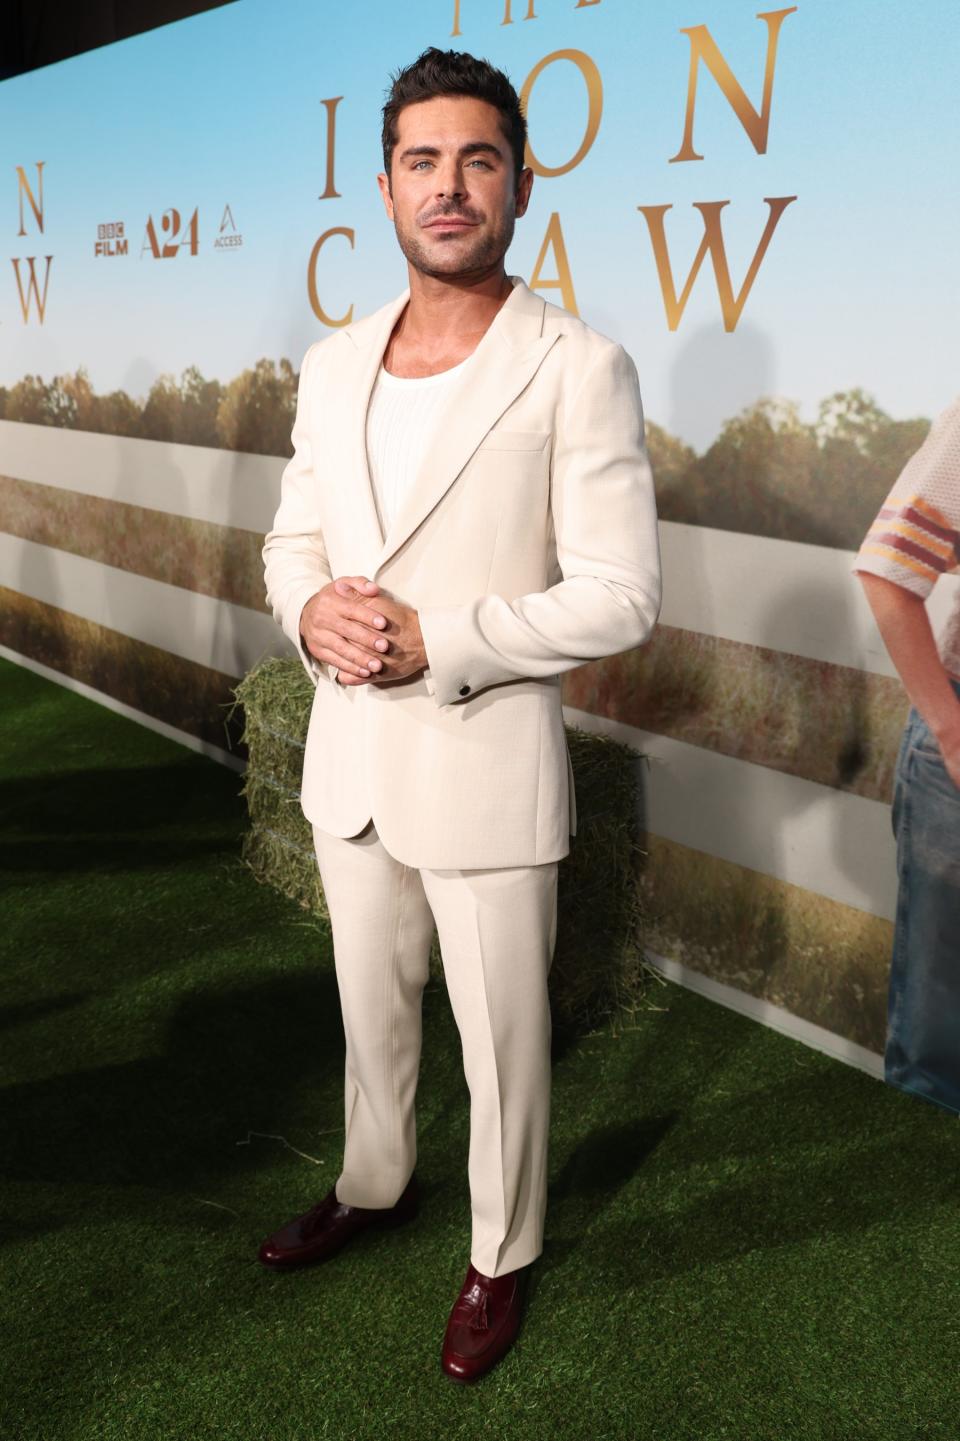 Zac Efron, suits, suiting, loafers, brogues, shoes, footwear, menswear, men's style, celebrity style, celebrity red carpet, red carpet, premiere, A24, The Iron Claw, Reiss, suit, cream suit